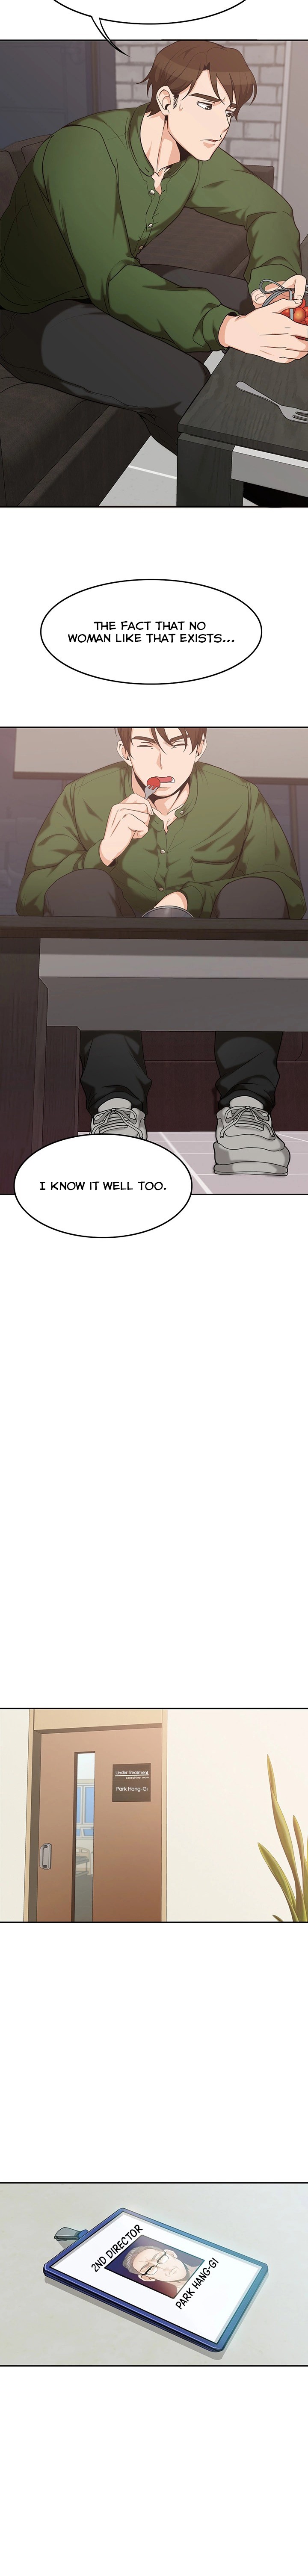 Oppa, Not There - Chapter 2 Page 13